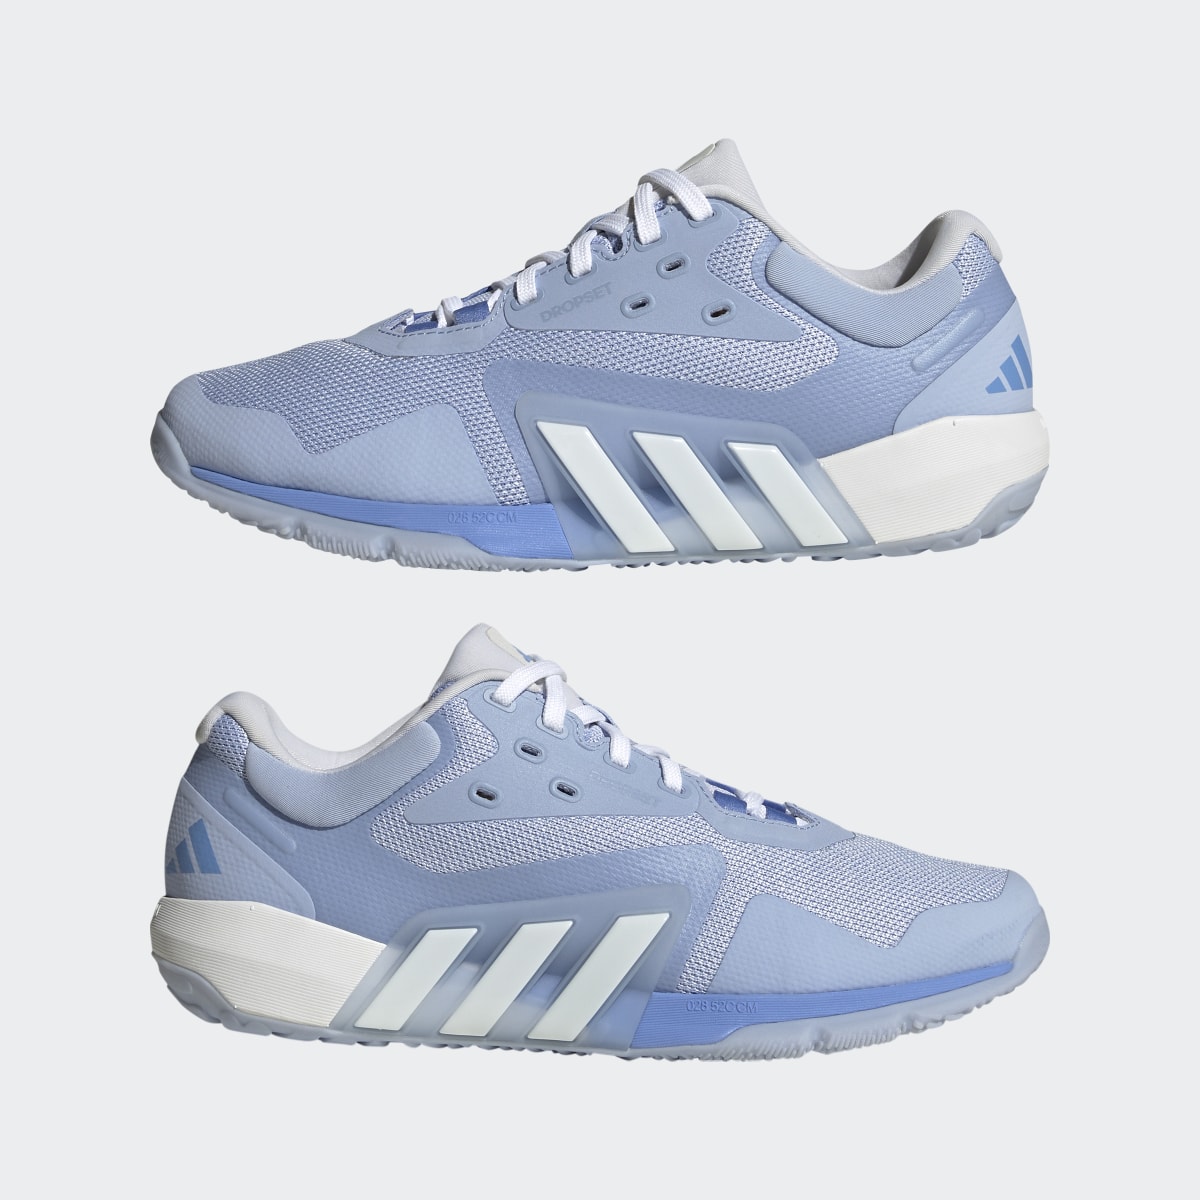 Adidas Dropset Trainer Shoes. 11